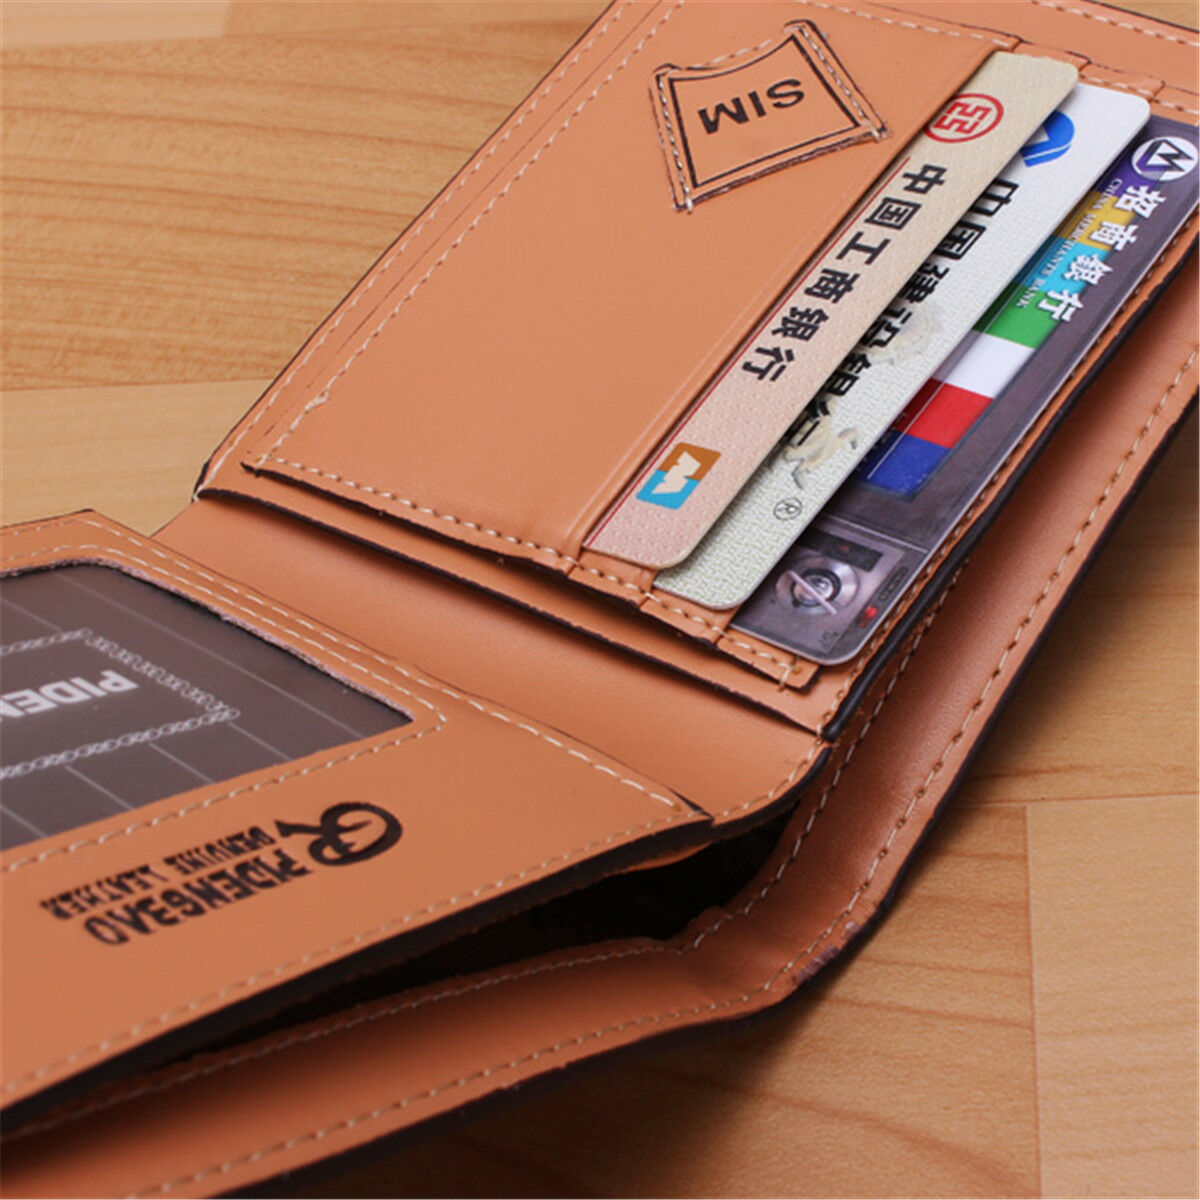 Men Wallet Leather Business Foldable Wallet Luxury Billfold Slim Hipster  Credit Card/ID Holders Inserts Coin Purses Cartera sac